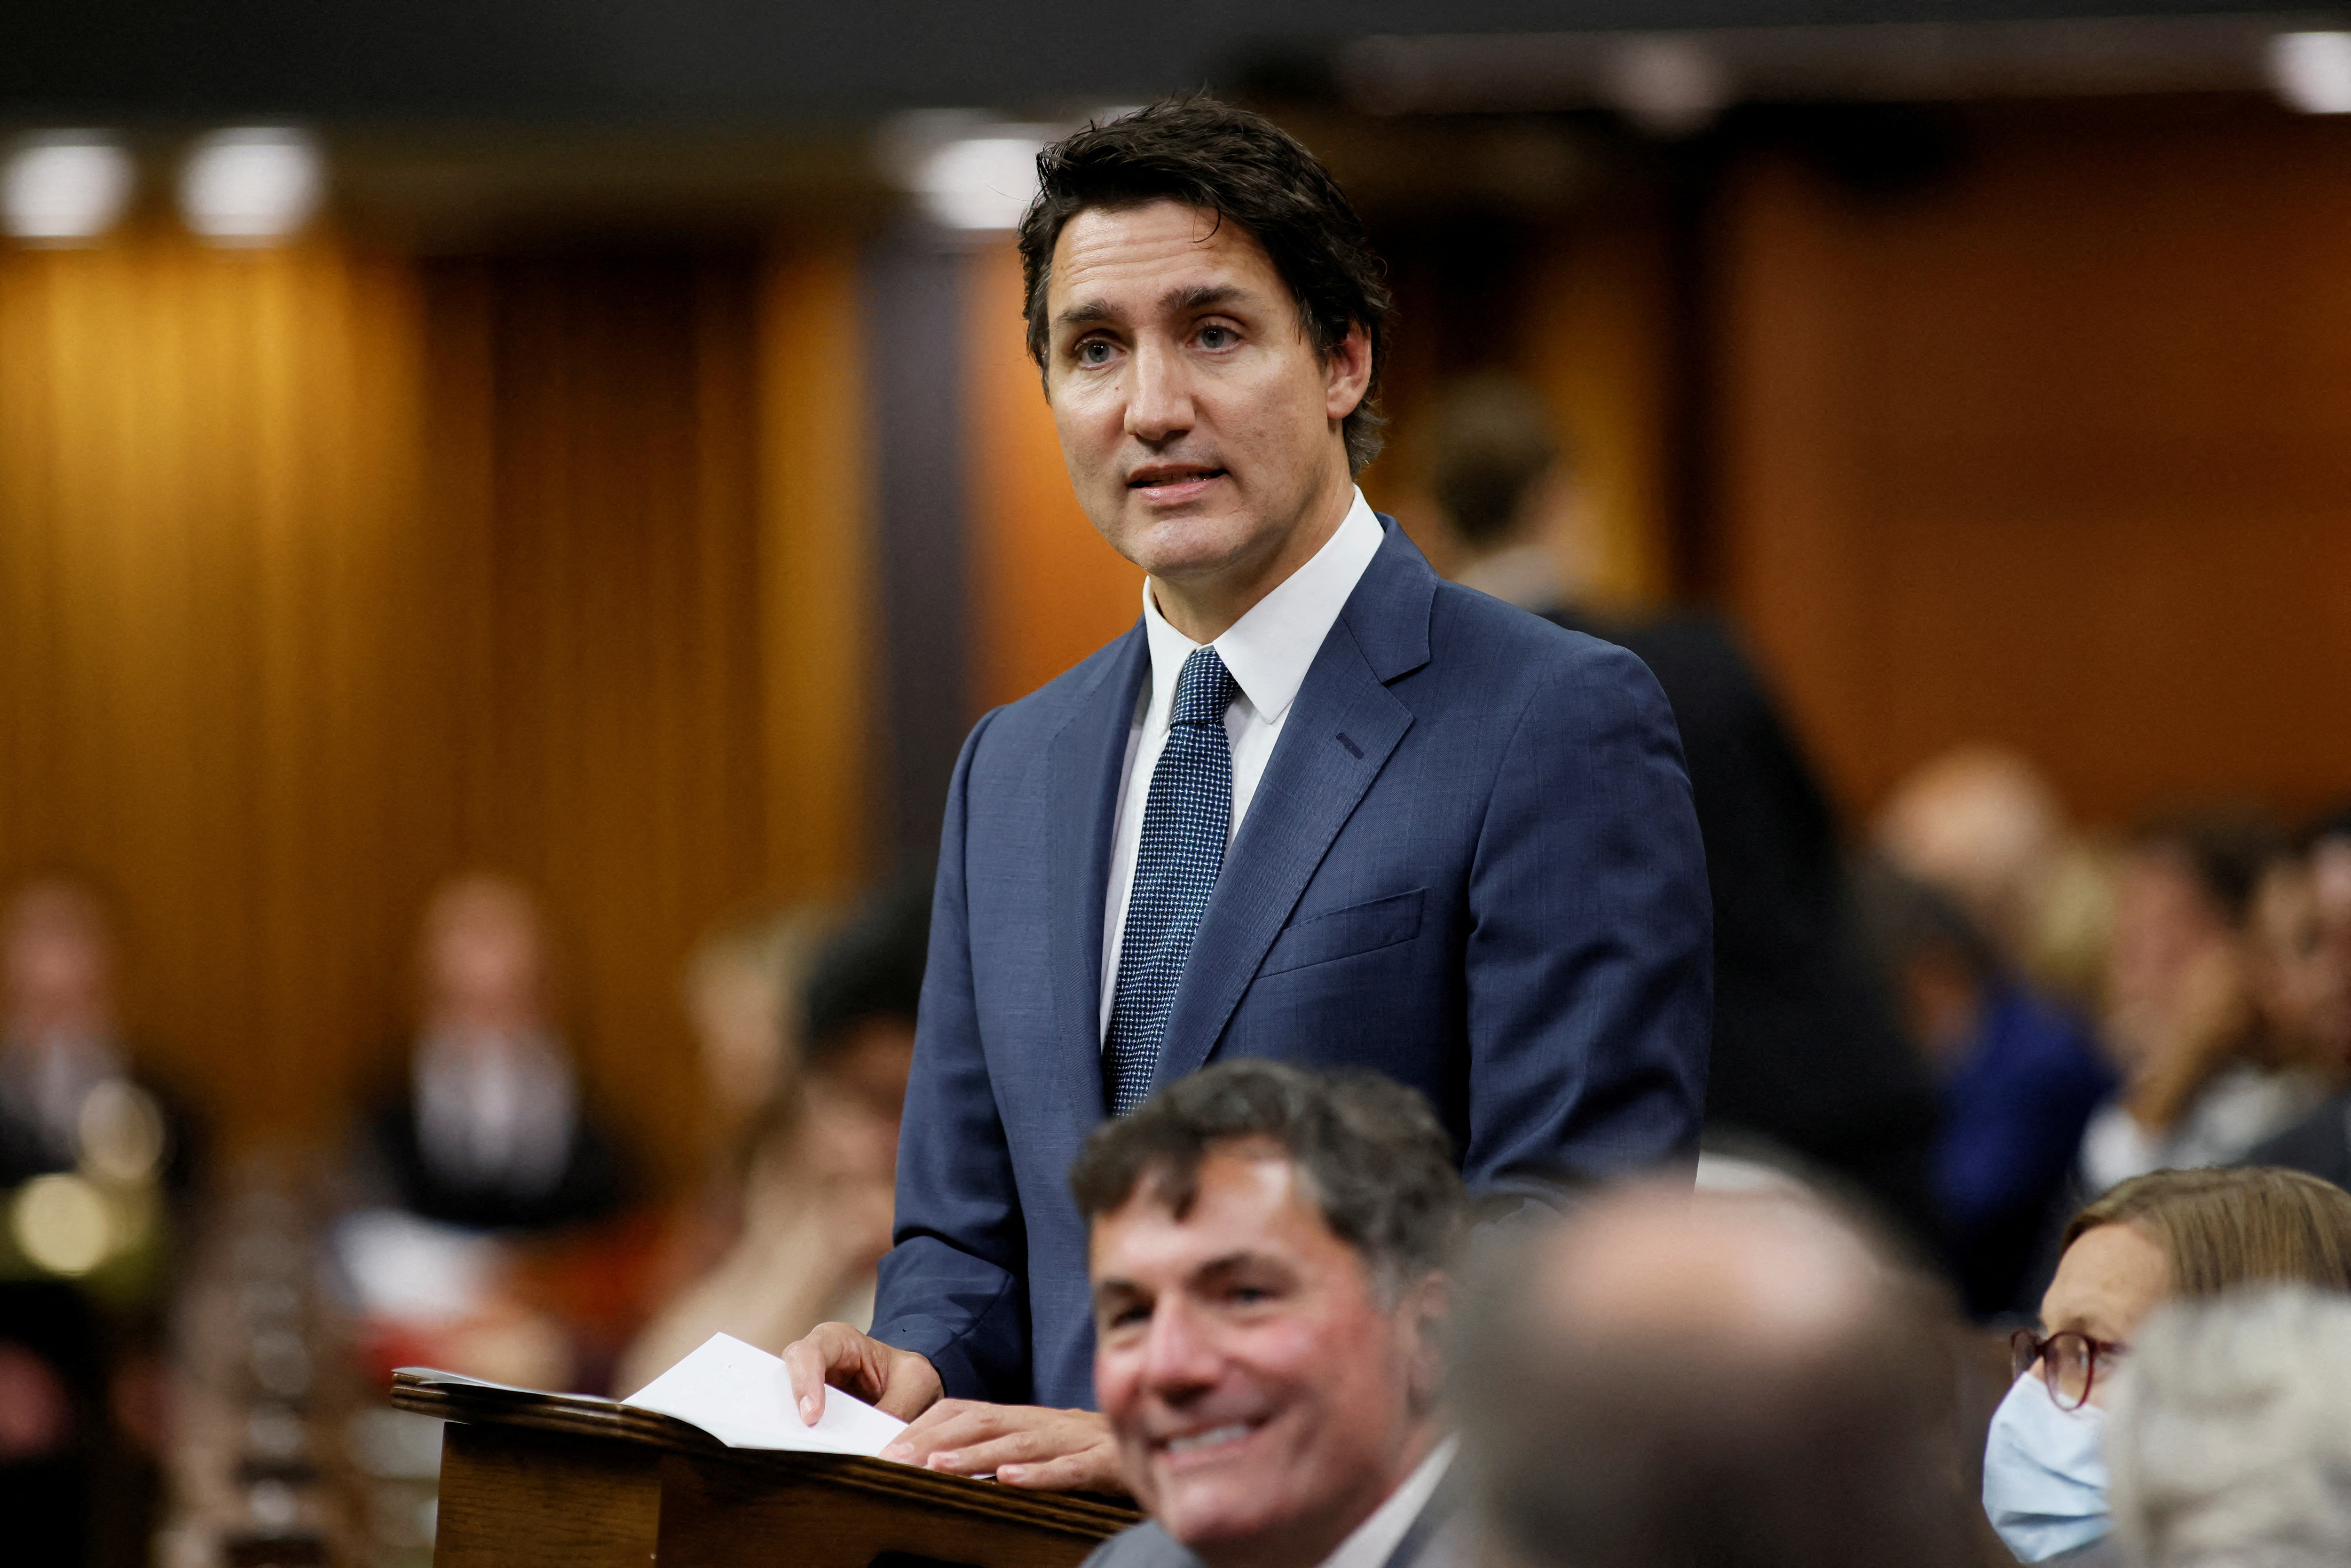 Canada's Prime Minister Justin Trudeau speaks in the House of Commons on Parliament Hill in Ottawa